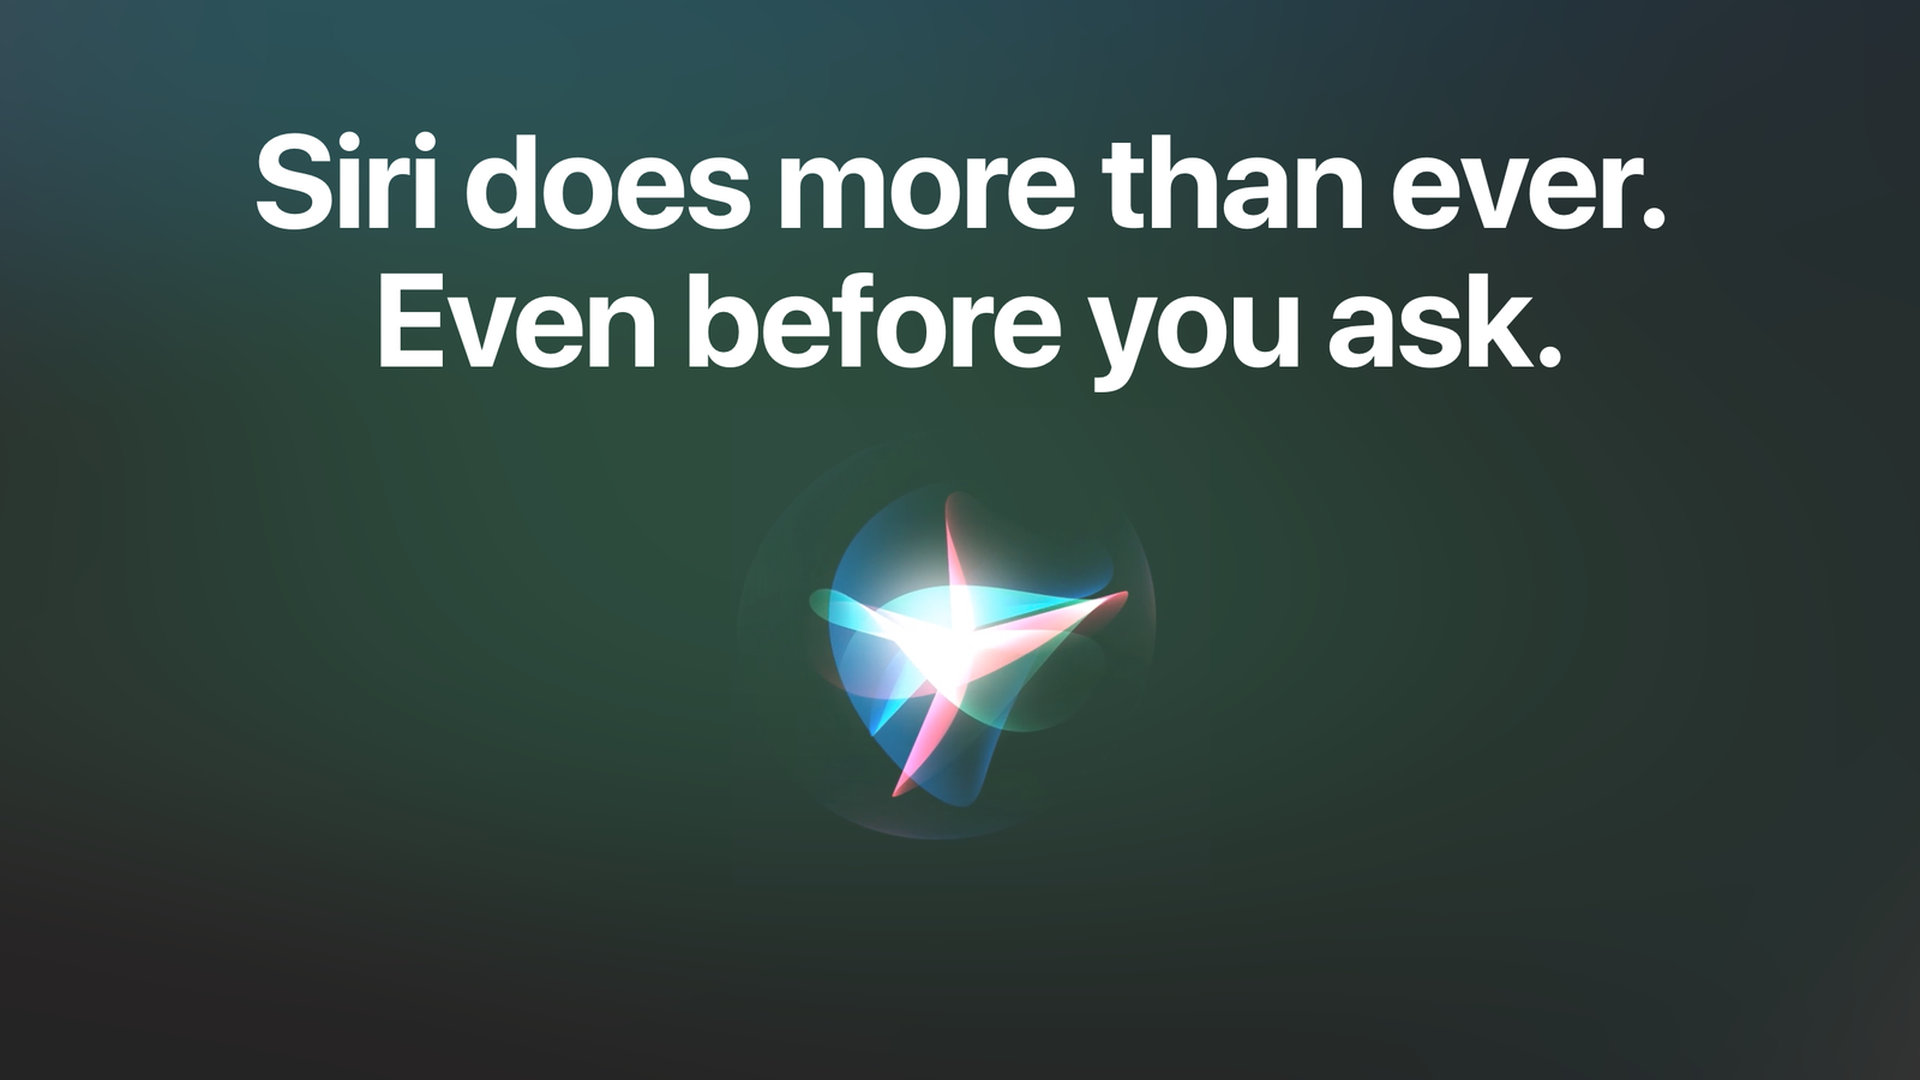 A screenshot from Apple.com touting that Siri does more than ever, even before you ask